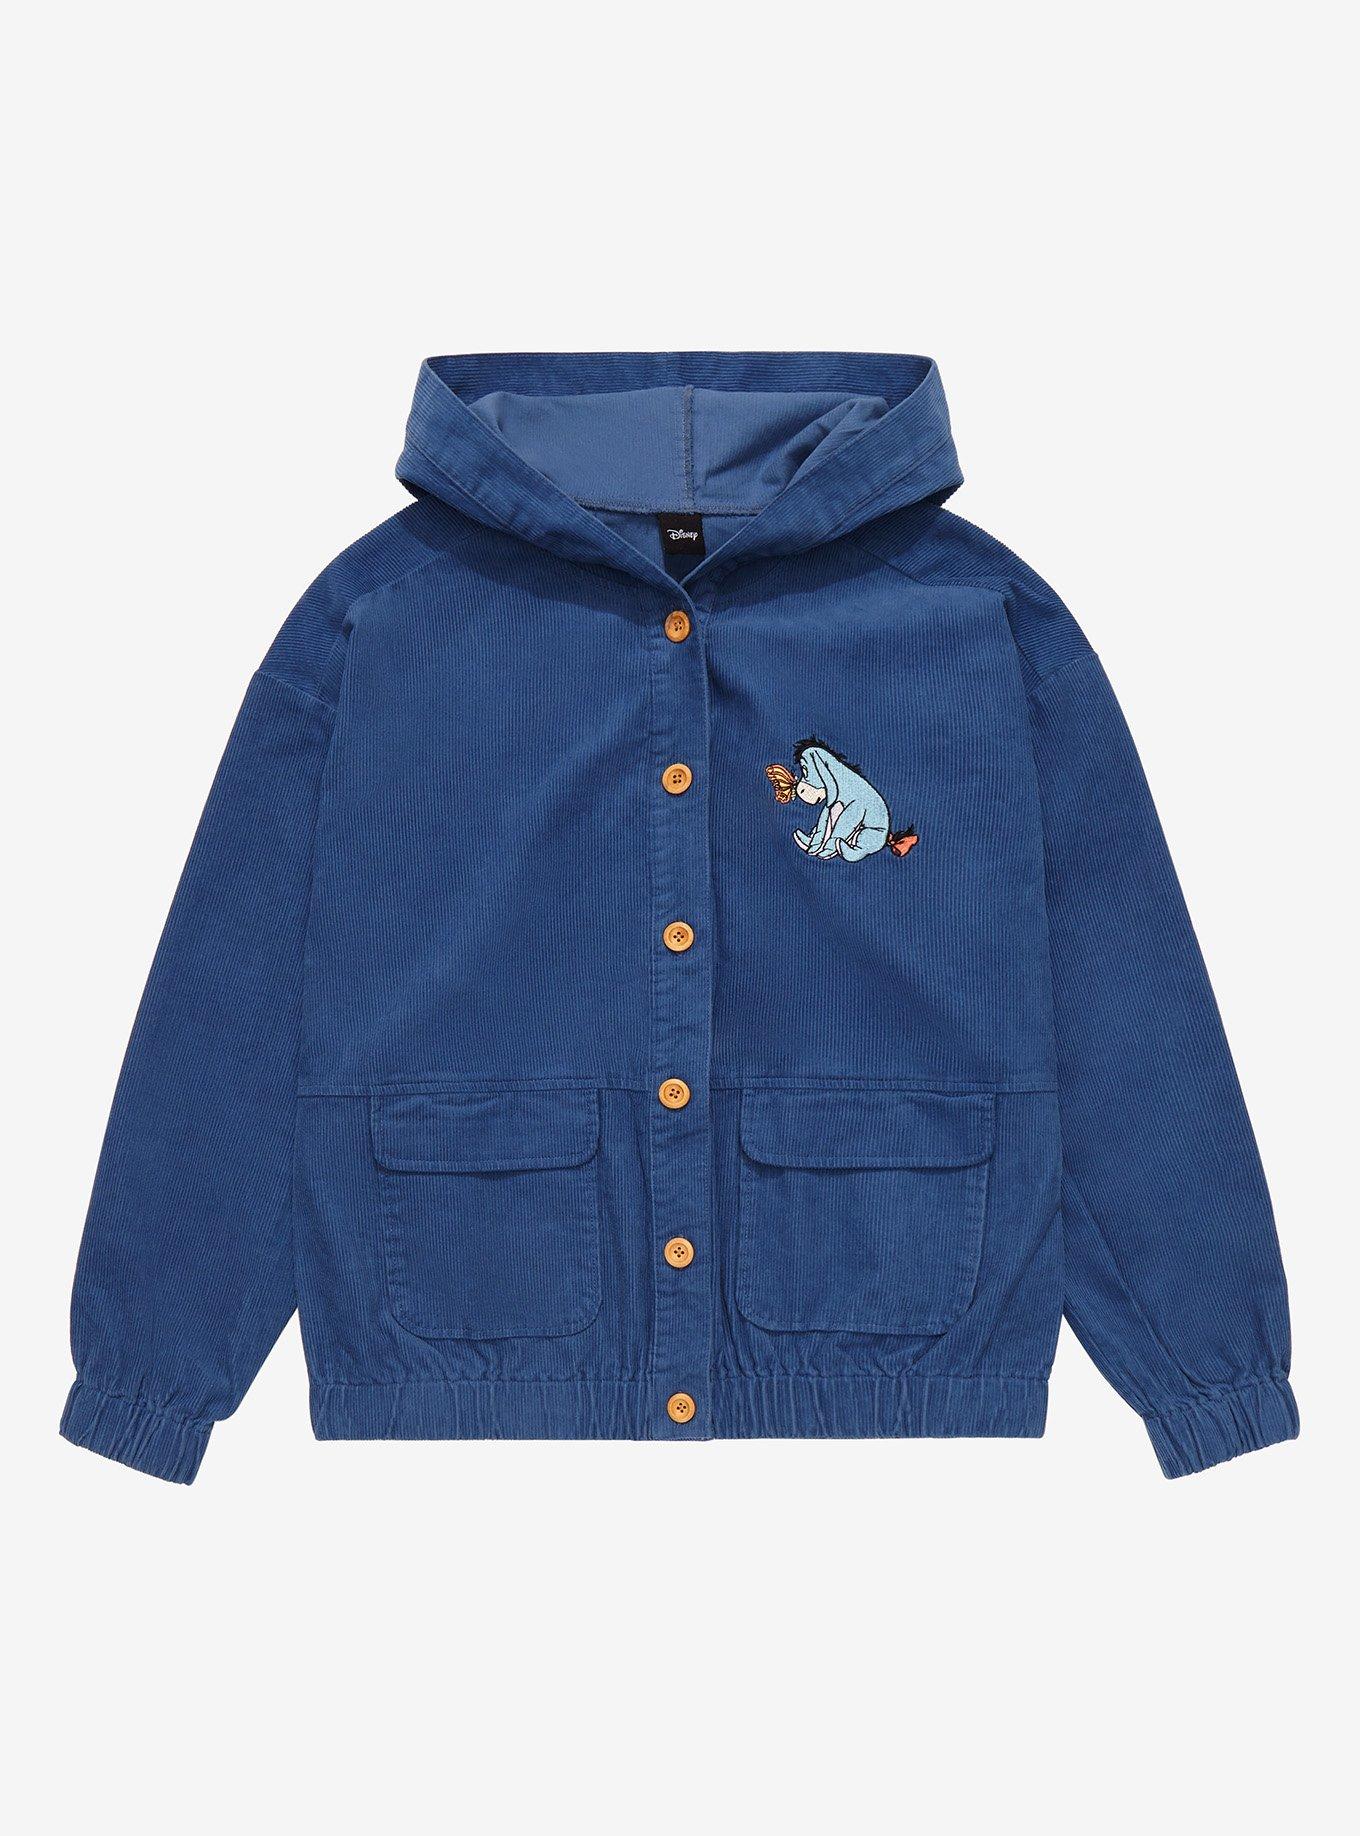 Sostener oro Prominente Disney Winnie the Pooh Eeyore Not Much of a Tail Women's Jacket - BoxLunch  Exclusive | BoxLunch